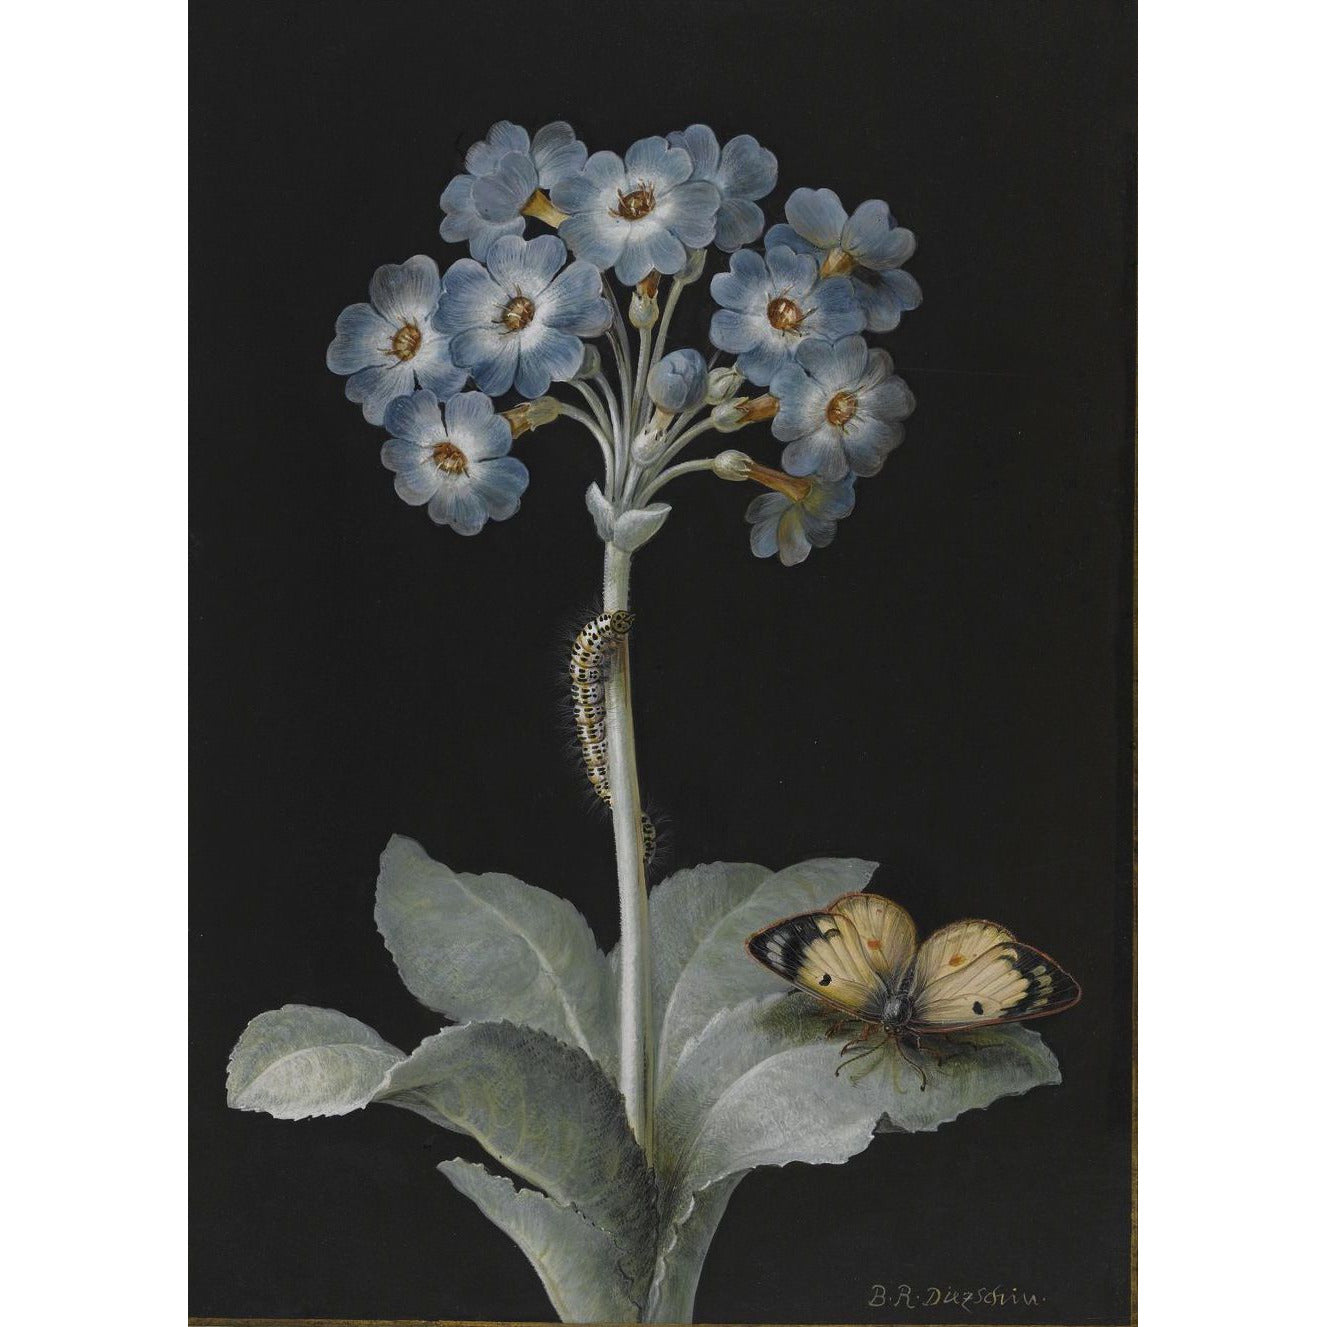 Greeting card - Blue primula auricula, with patterned caterpillar on the stem and pale clouded yellow butterfly on a leaf. Black background. From the collection of The Fitzwilliam Museum, brought to you by CuratingCambridge.com